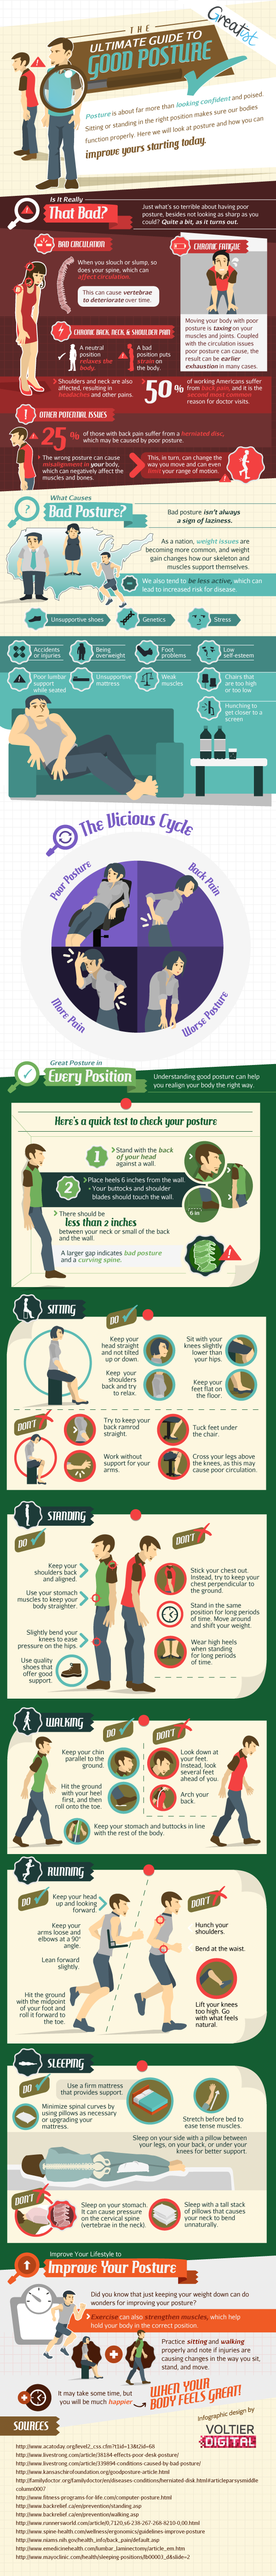 Guide to Posture